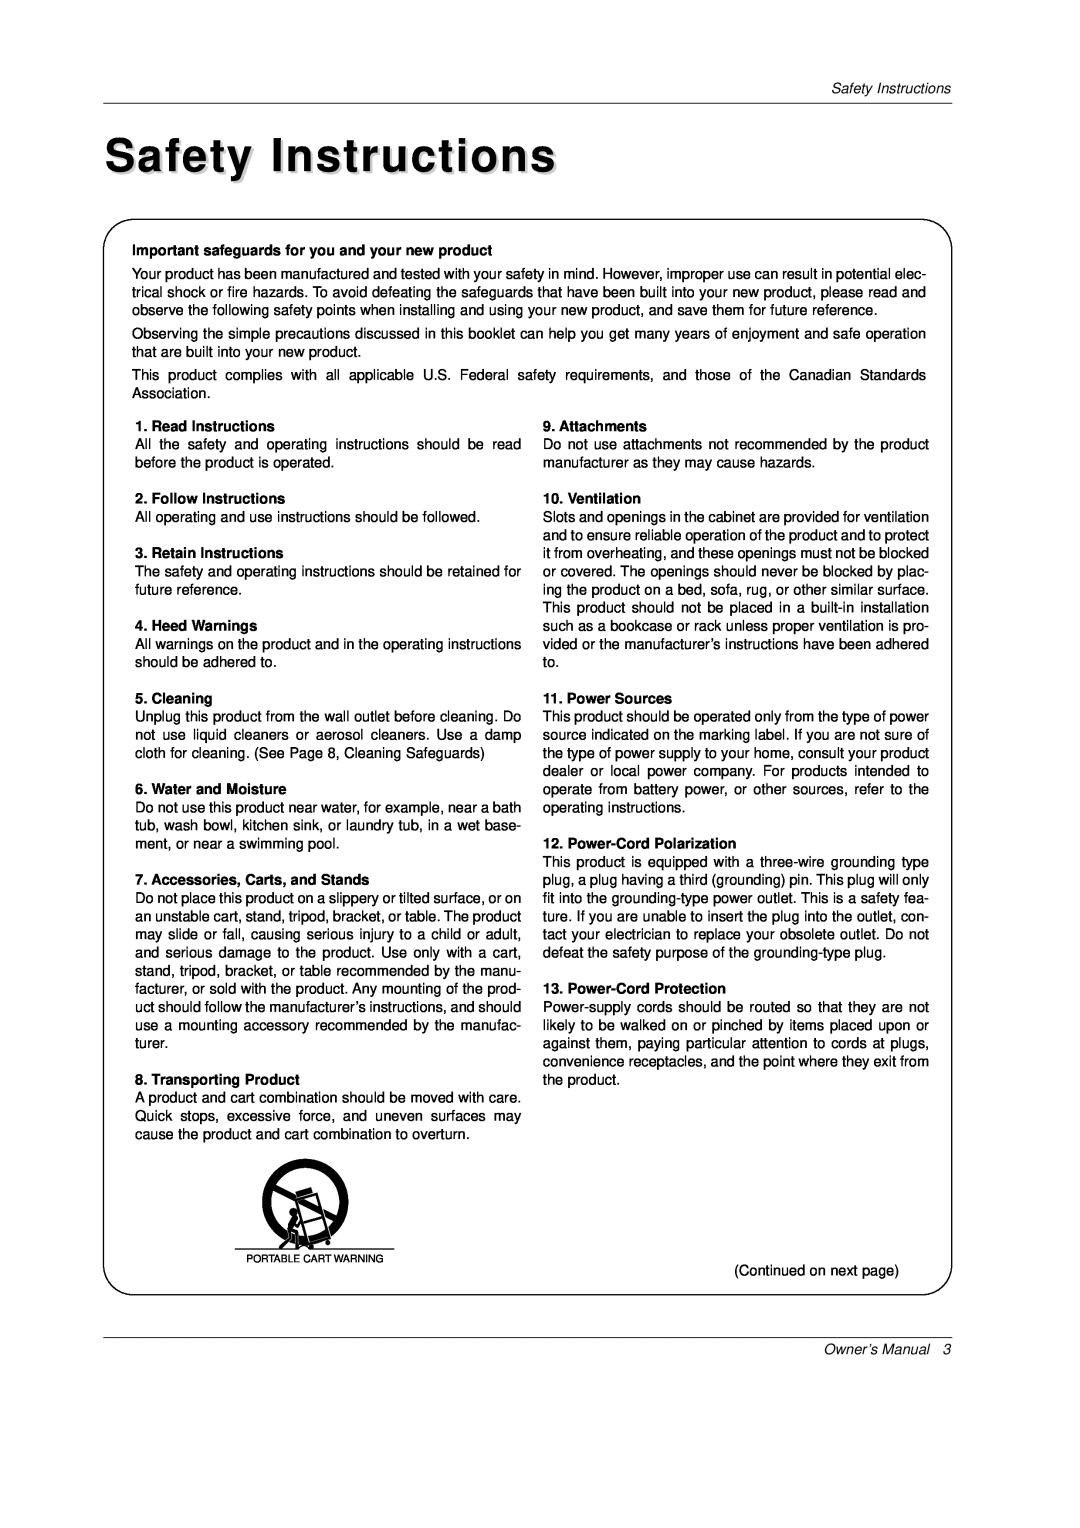 Mitsubishi Electronics PD-4225S Safety Instructions, Important safeguards for you and your new product, Read Instructions 